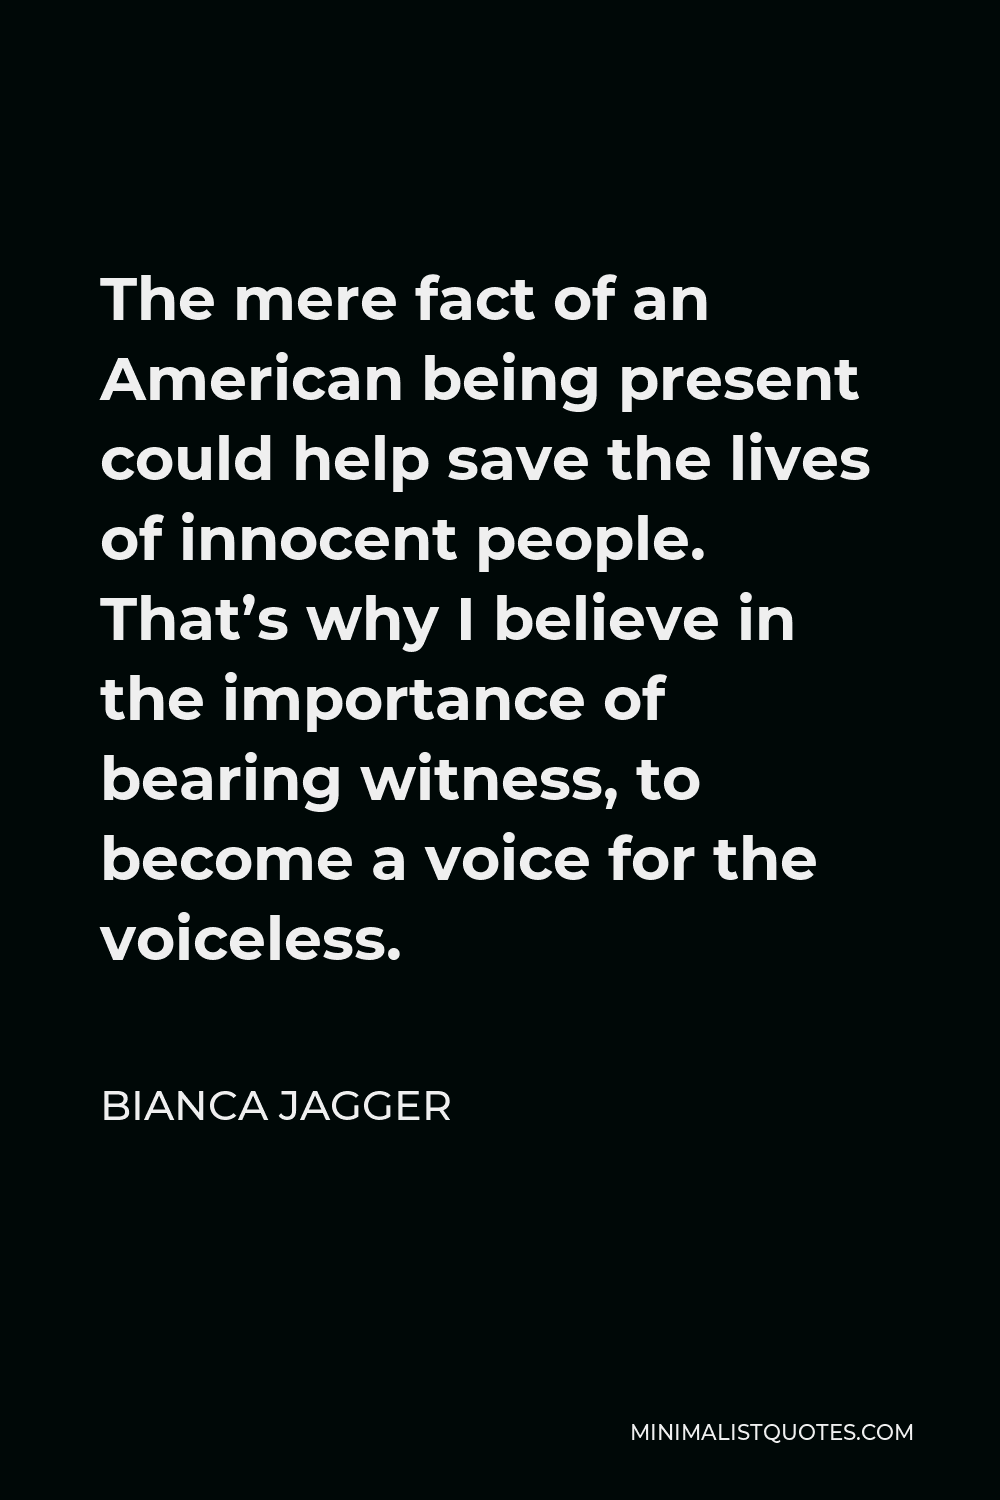 Bianca Jagger Quote - The mere fact of an American being present could help save the lives of innocent people. That’s why I believe in the importance of bearing witness, to become a voice for the voiceless.